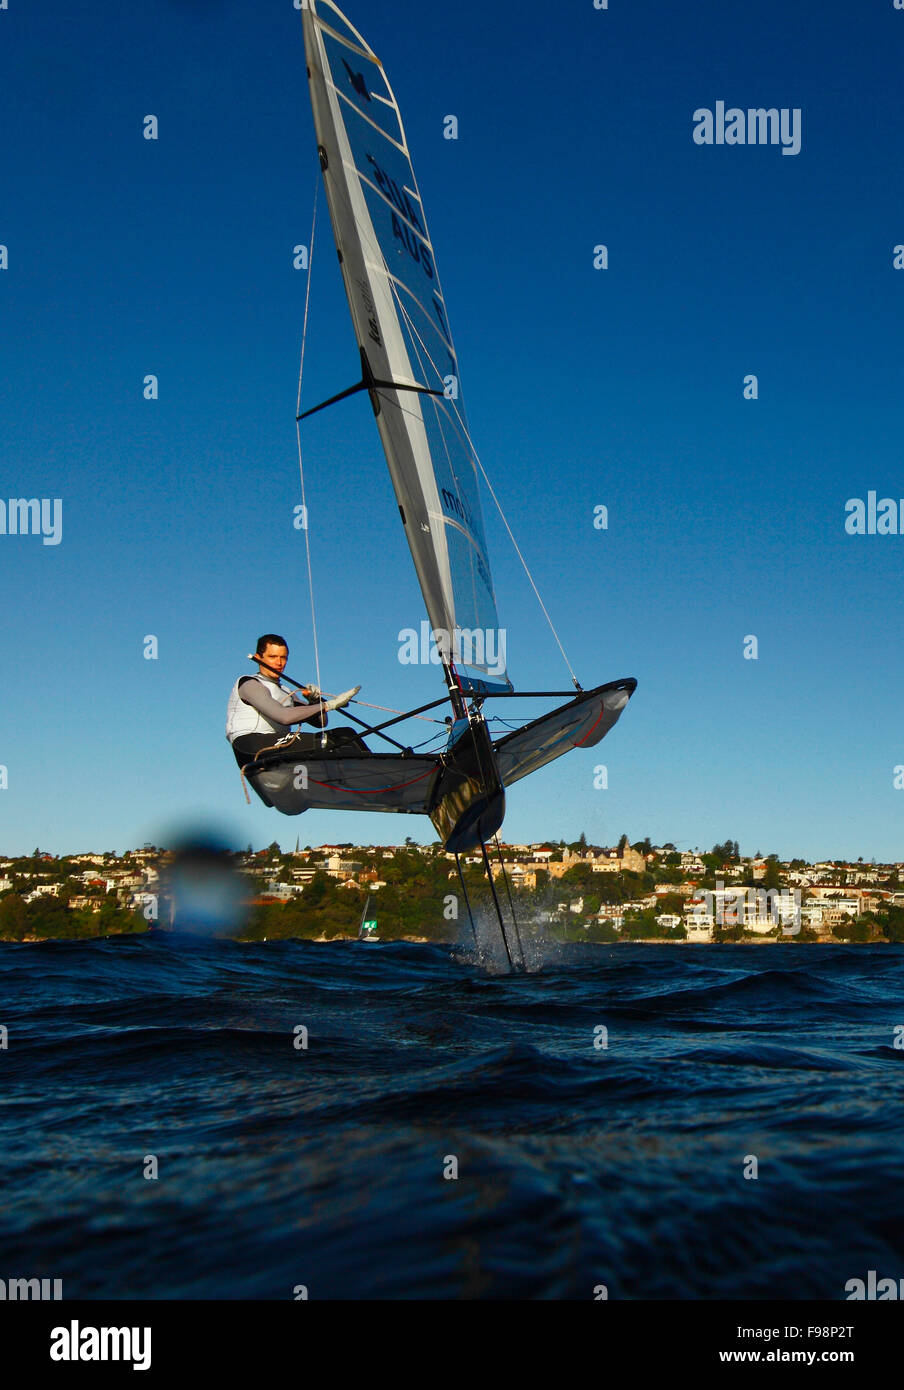 Scott Babbage in a training session on his Moth Mach 2 in Sydney Harbour, Single-handed sailing dinghy with hydro-foils. Stock Photo